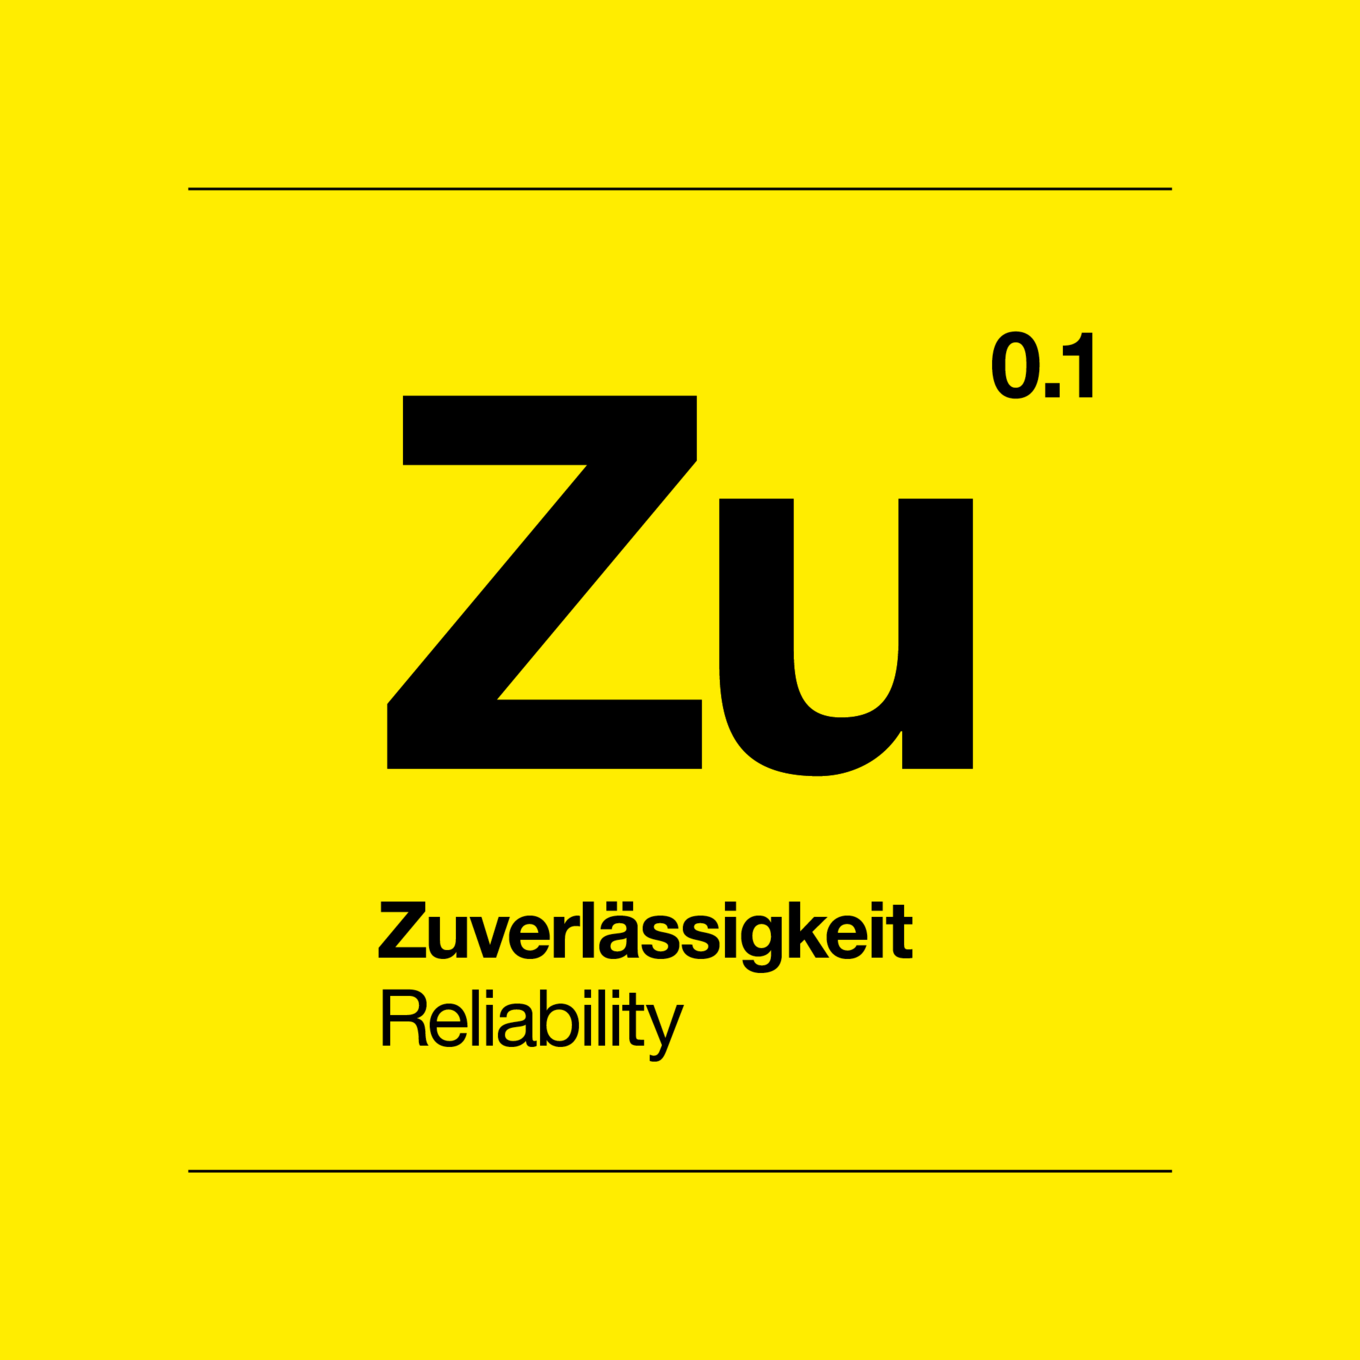 [Translate to Polnisch:] Icon for value Reliability